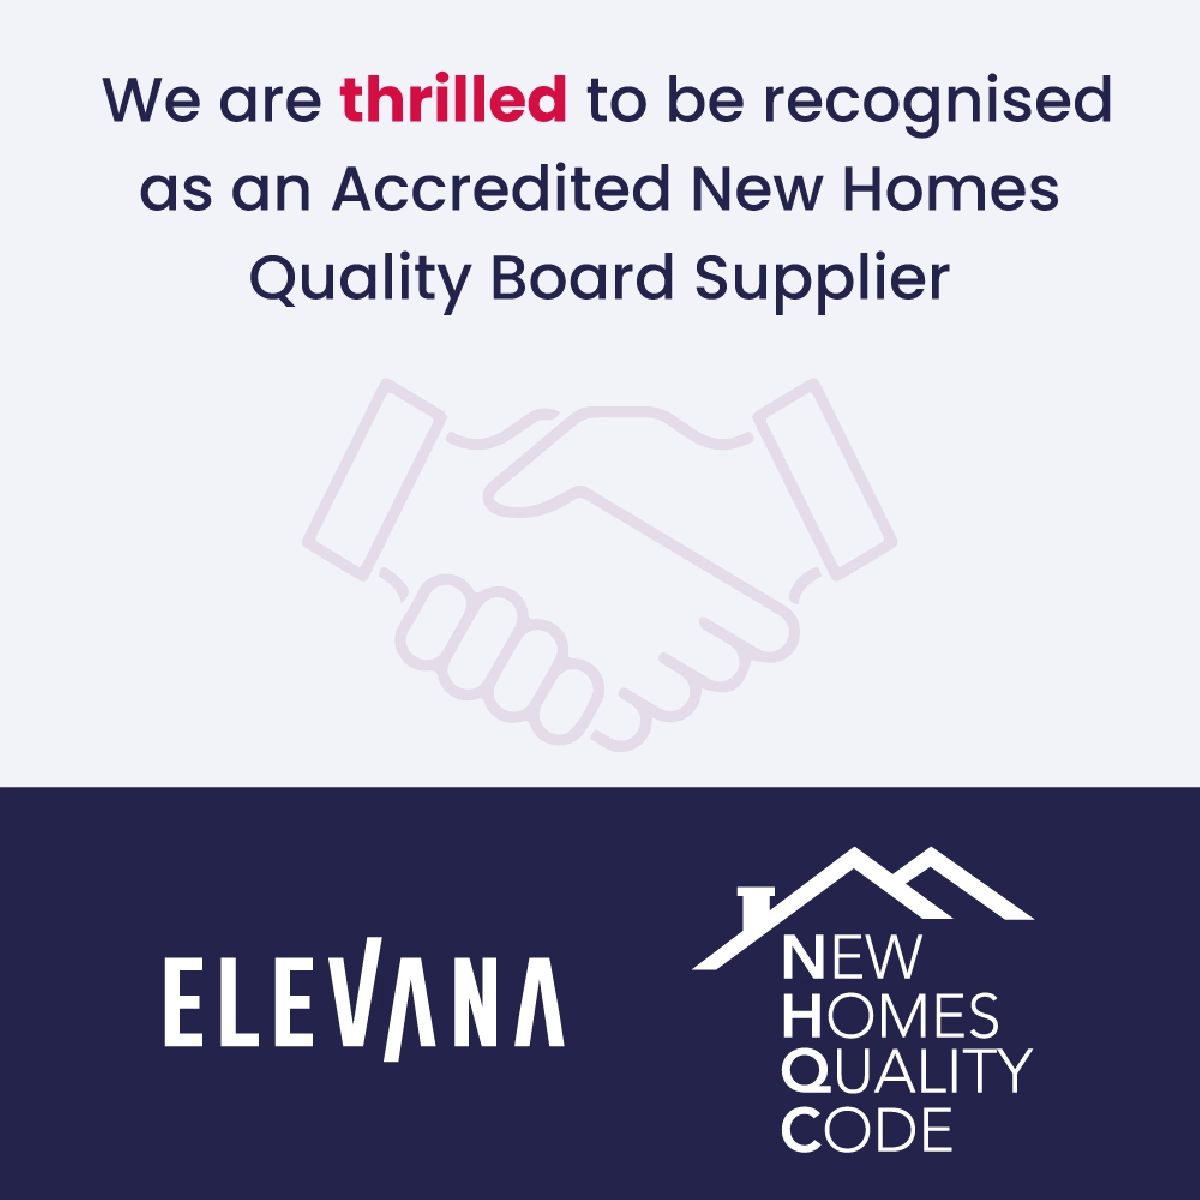 Article Image - Elevana Ltd Recognised as an Accredited New Homes Quality Board Supplier